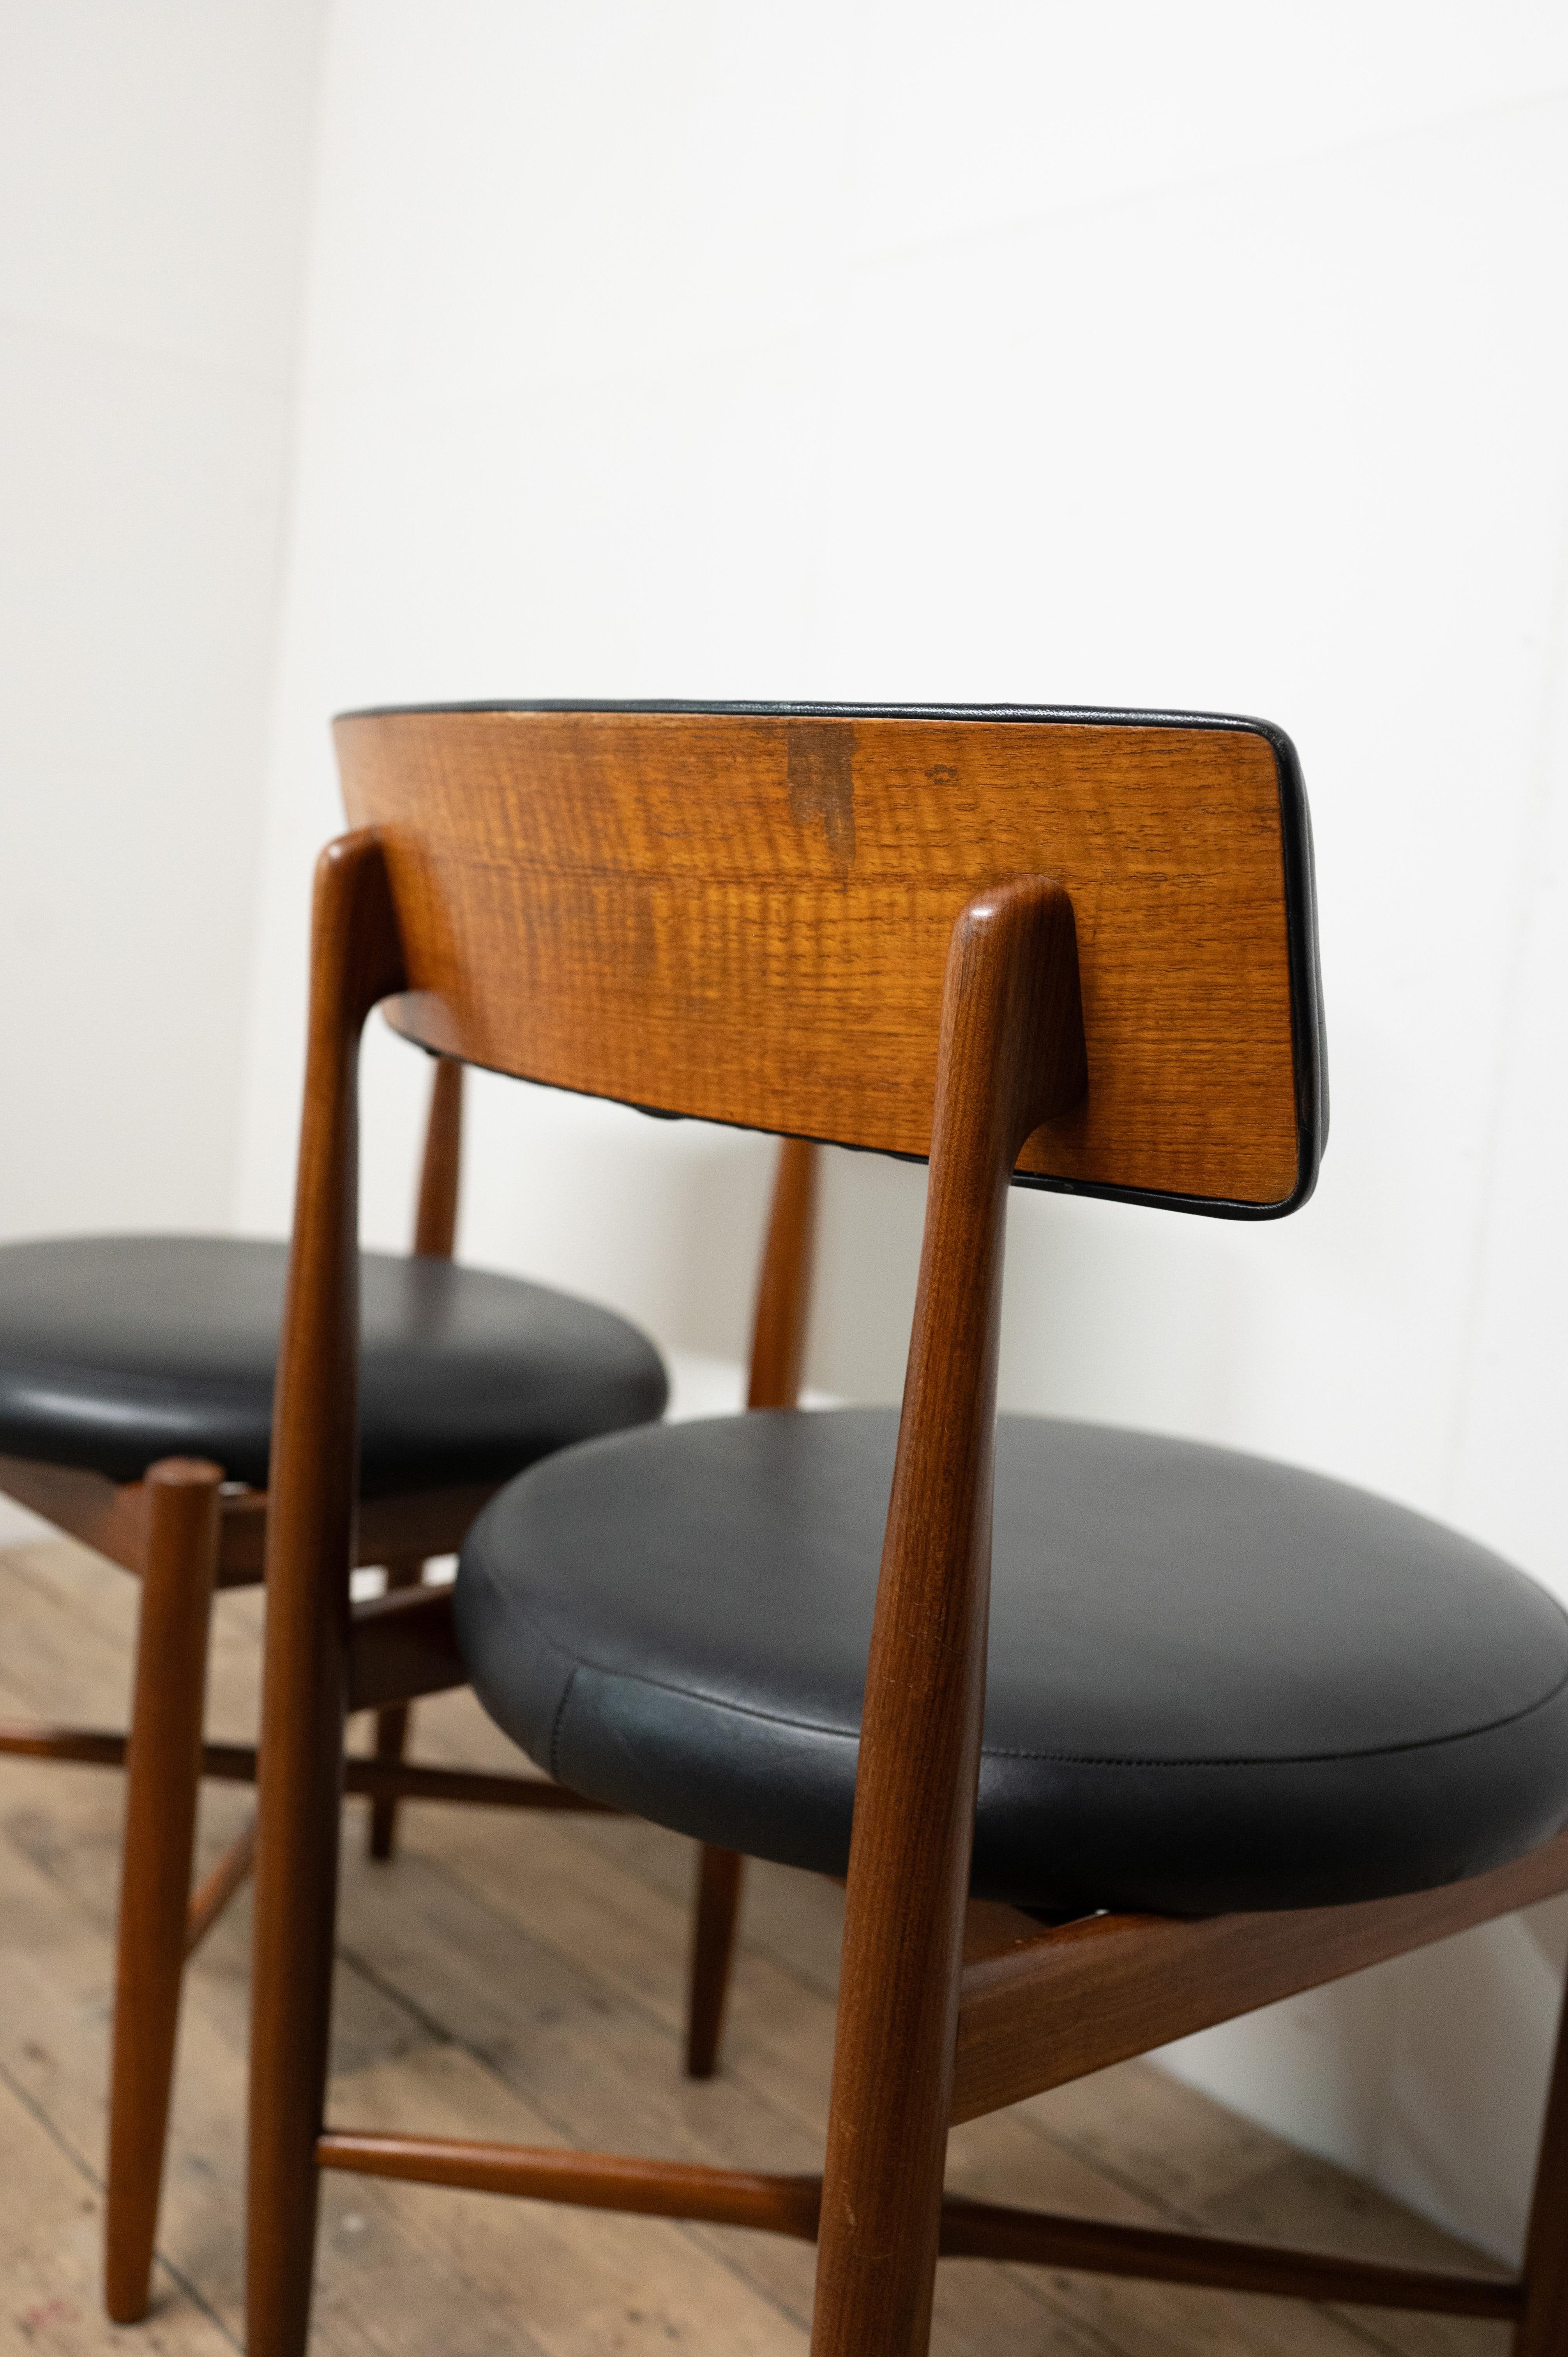 20th Century Pair of Teak Dining Chairs by V Wilkins for G Plan  Mid Century Fresco